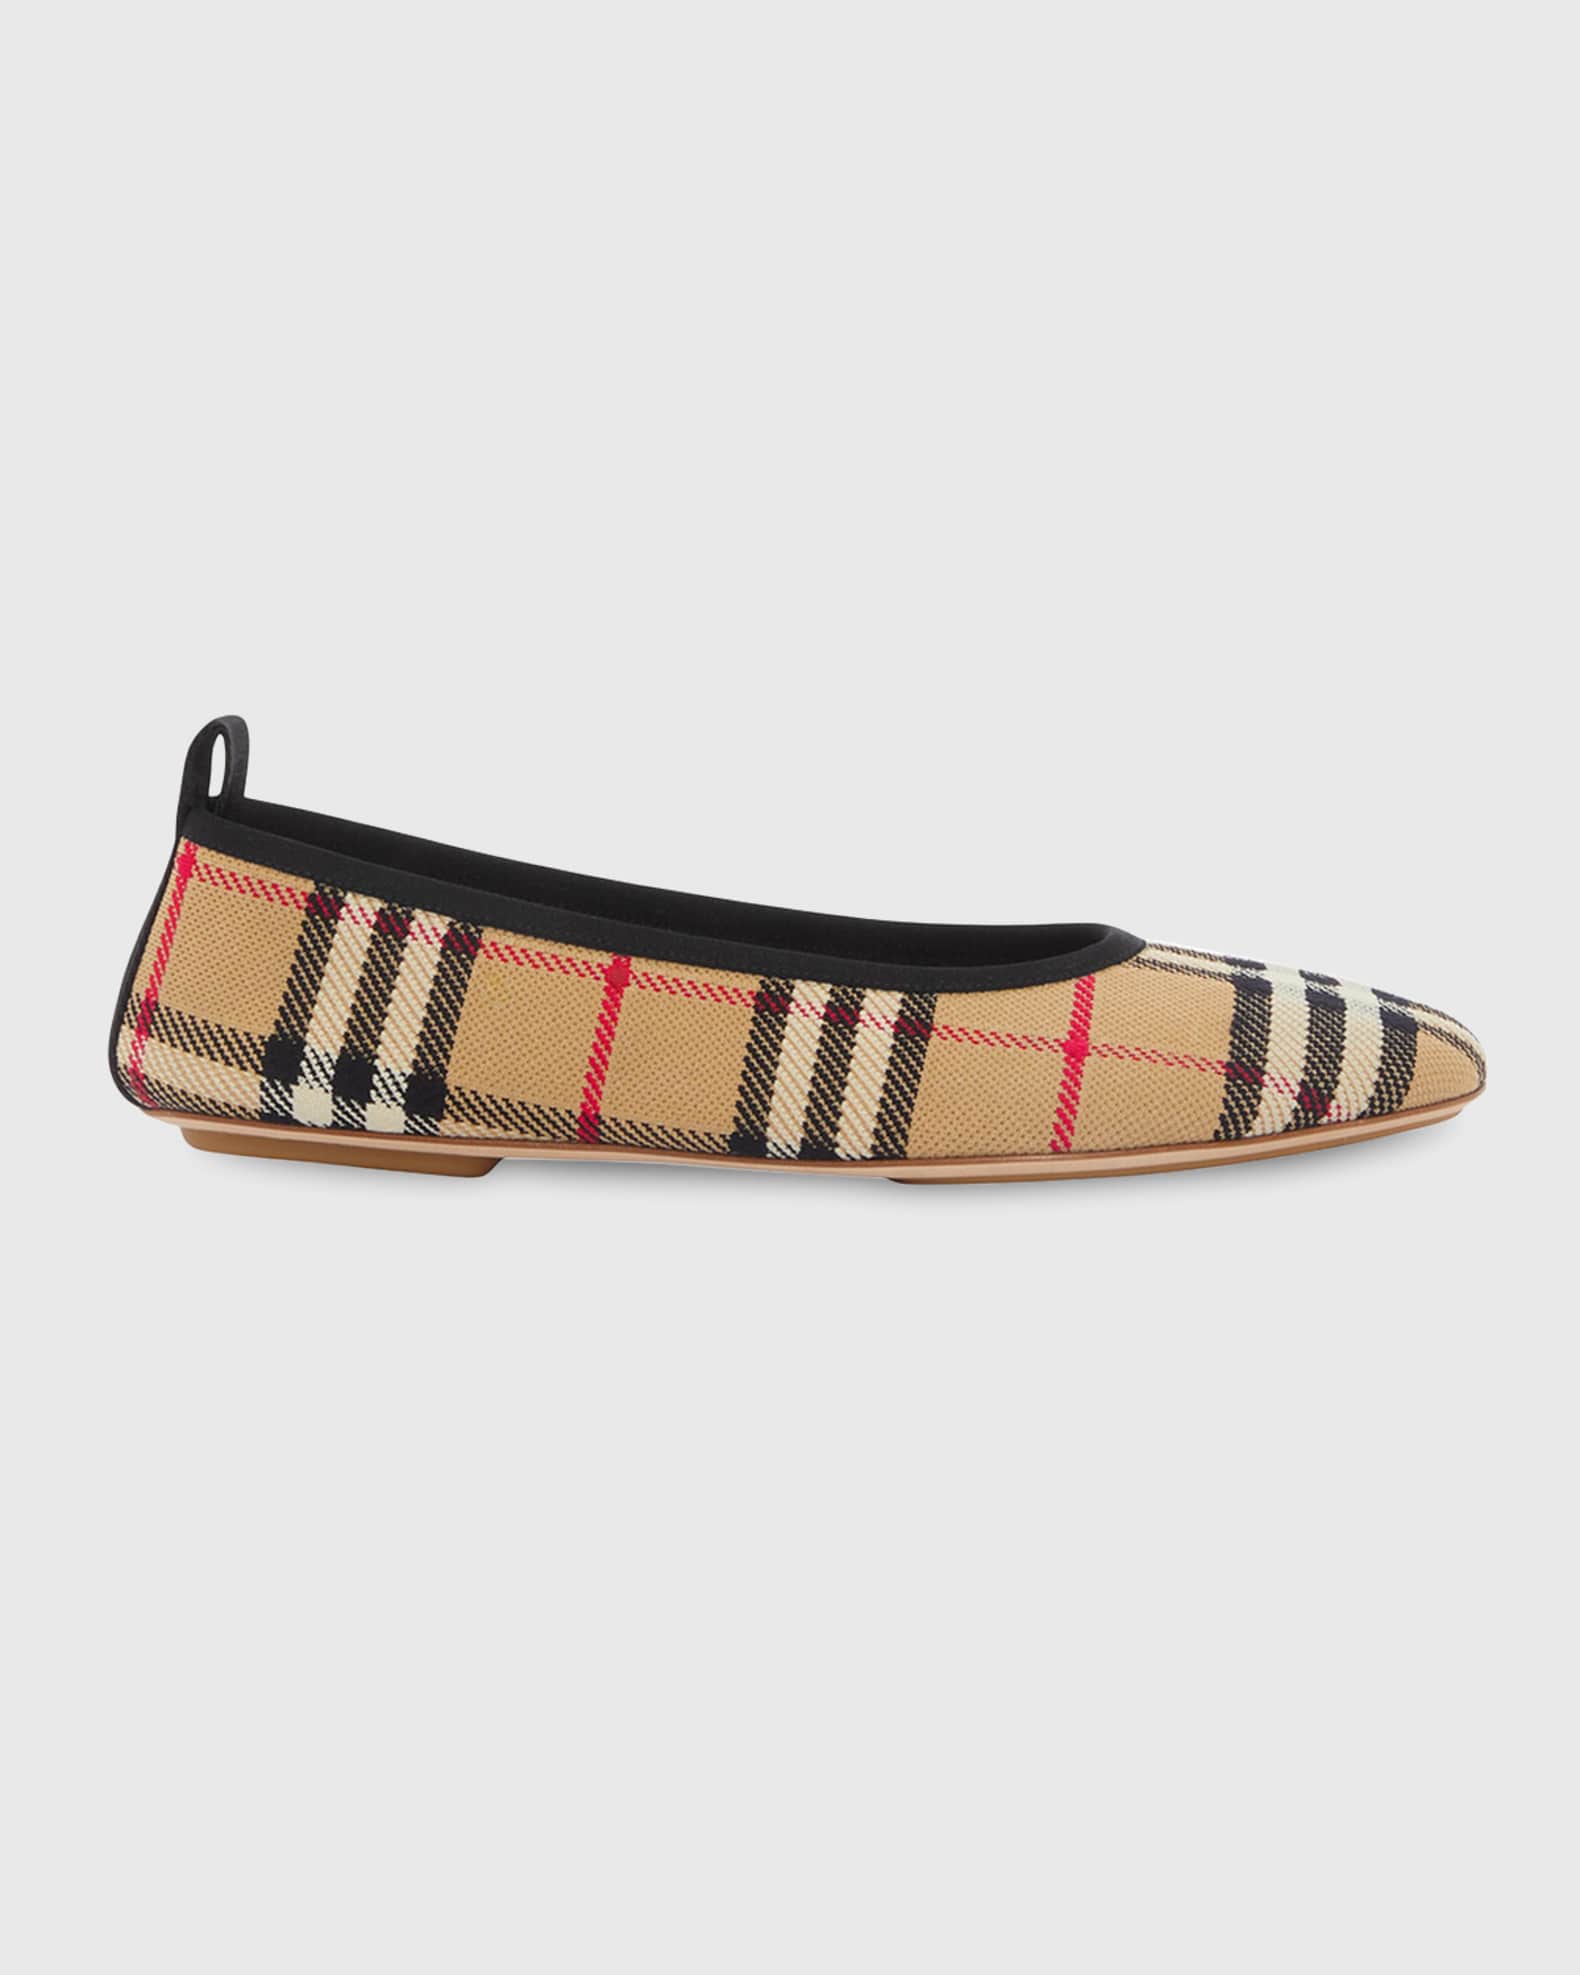 Graceful Checkered Style: Burberry Check Ballet Flats